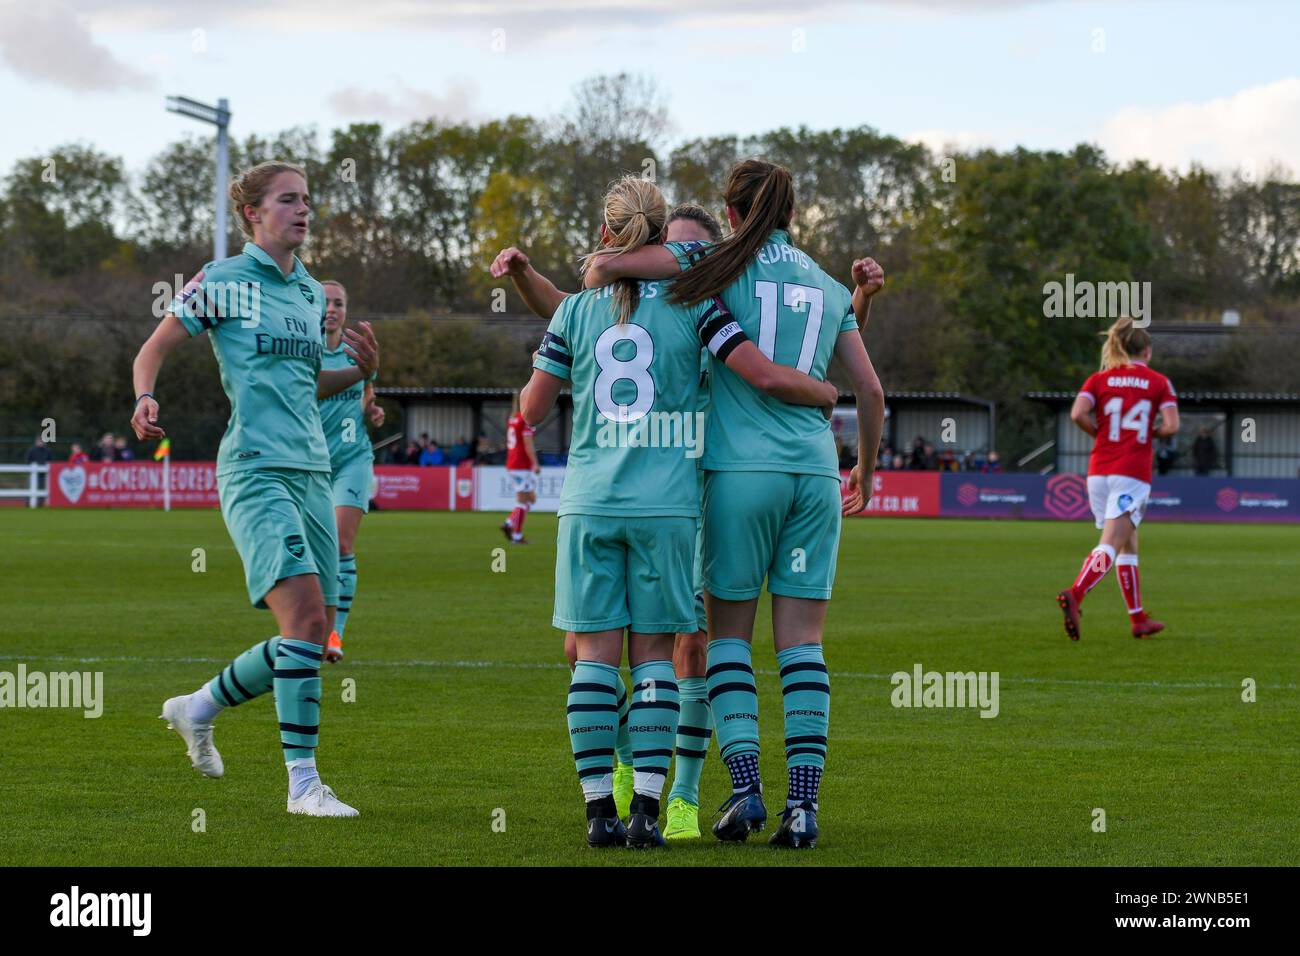 Bristol, England. 28 October 2018. Jordan Nobbs of Arsenal celebrates scoring her side's first goal with team-mates Lisa Evans and Vivianne Miedema during the FA Women's Super League game between Bristol City and Arsenal at Stoke Gifford Stadium in Bristol, England, UK on 28 October 2018. Credit: Duncan Thomas/Majestic Media. Stock Photo